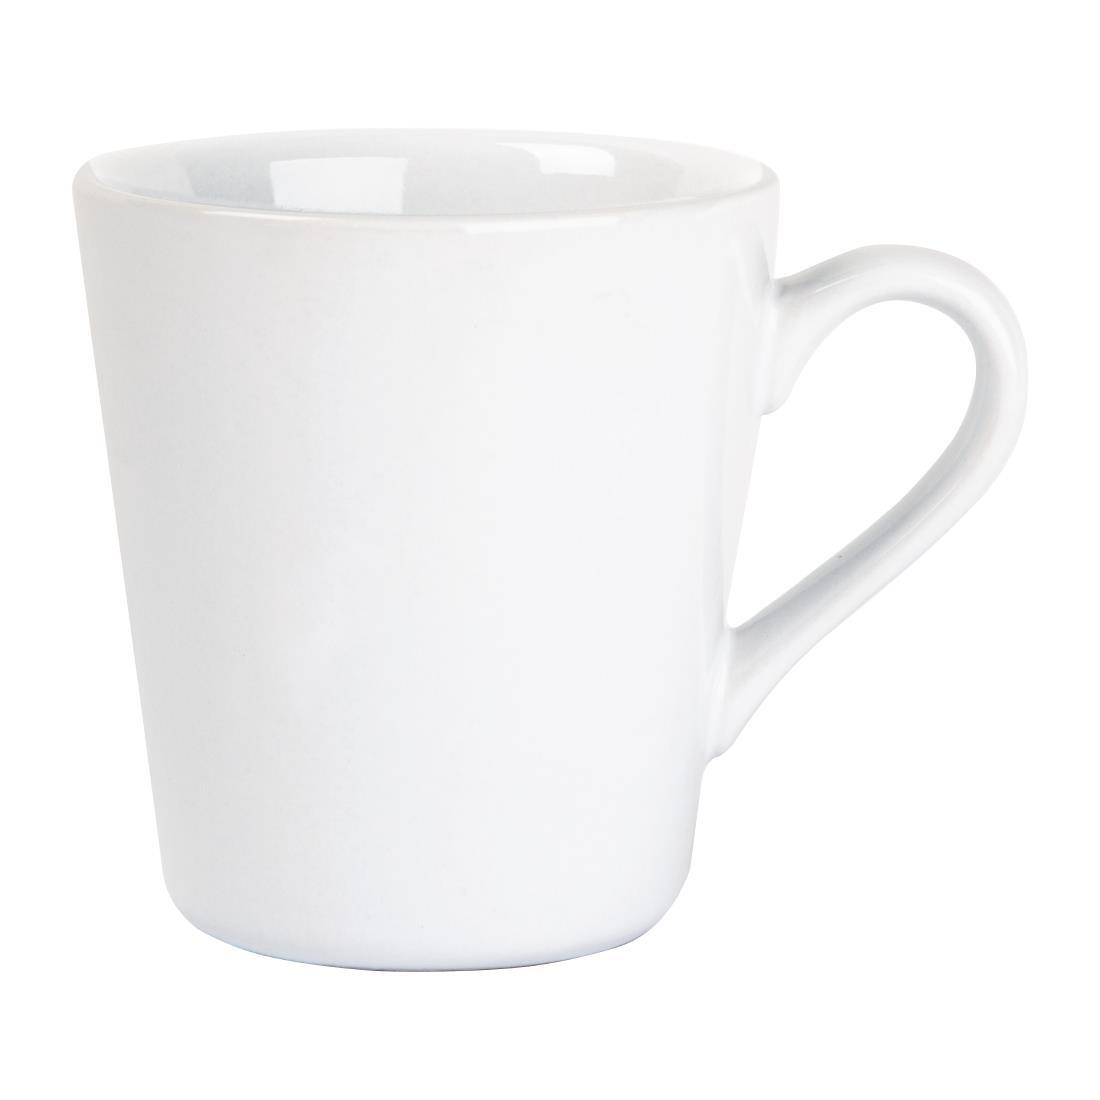 Olympia Cafe Flat White Cups White 170ml (Pack of 12) - FF991  - 3